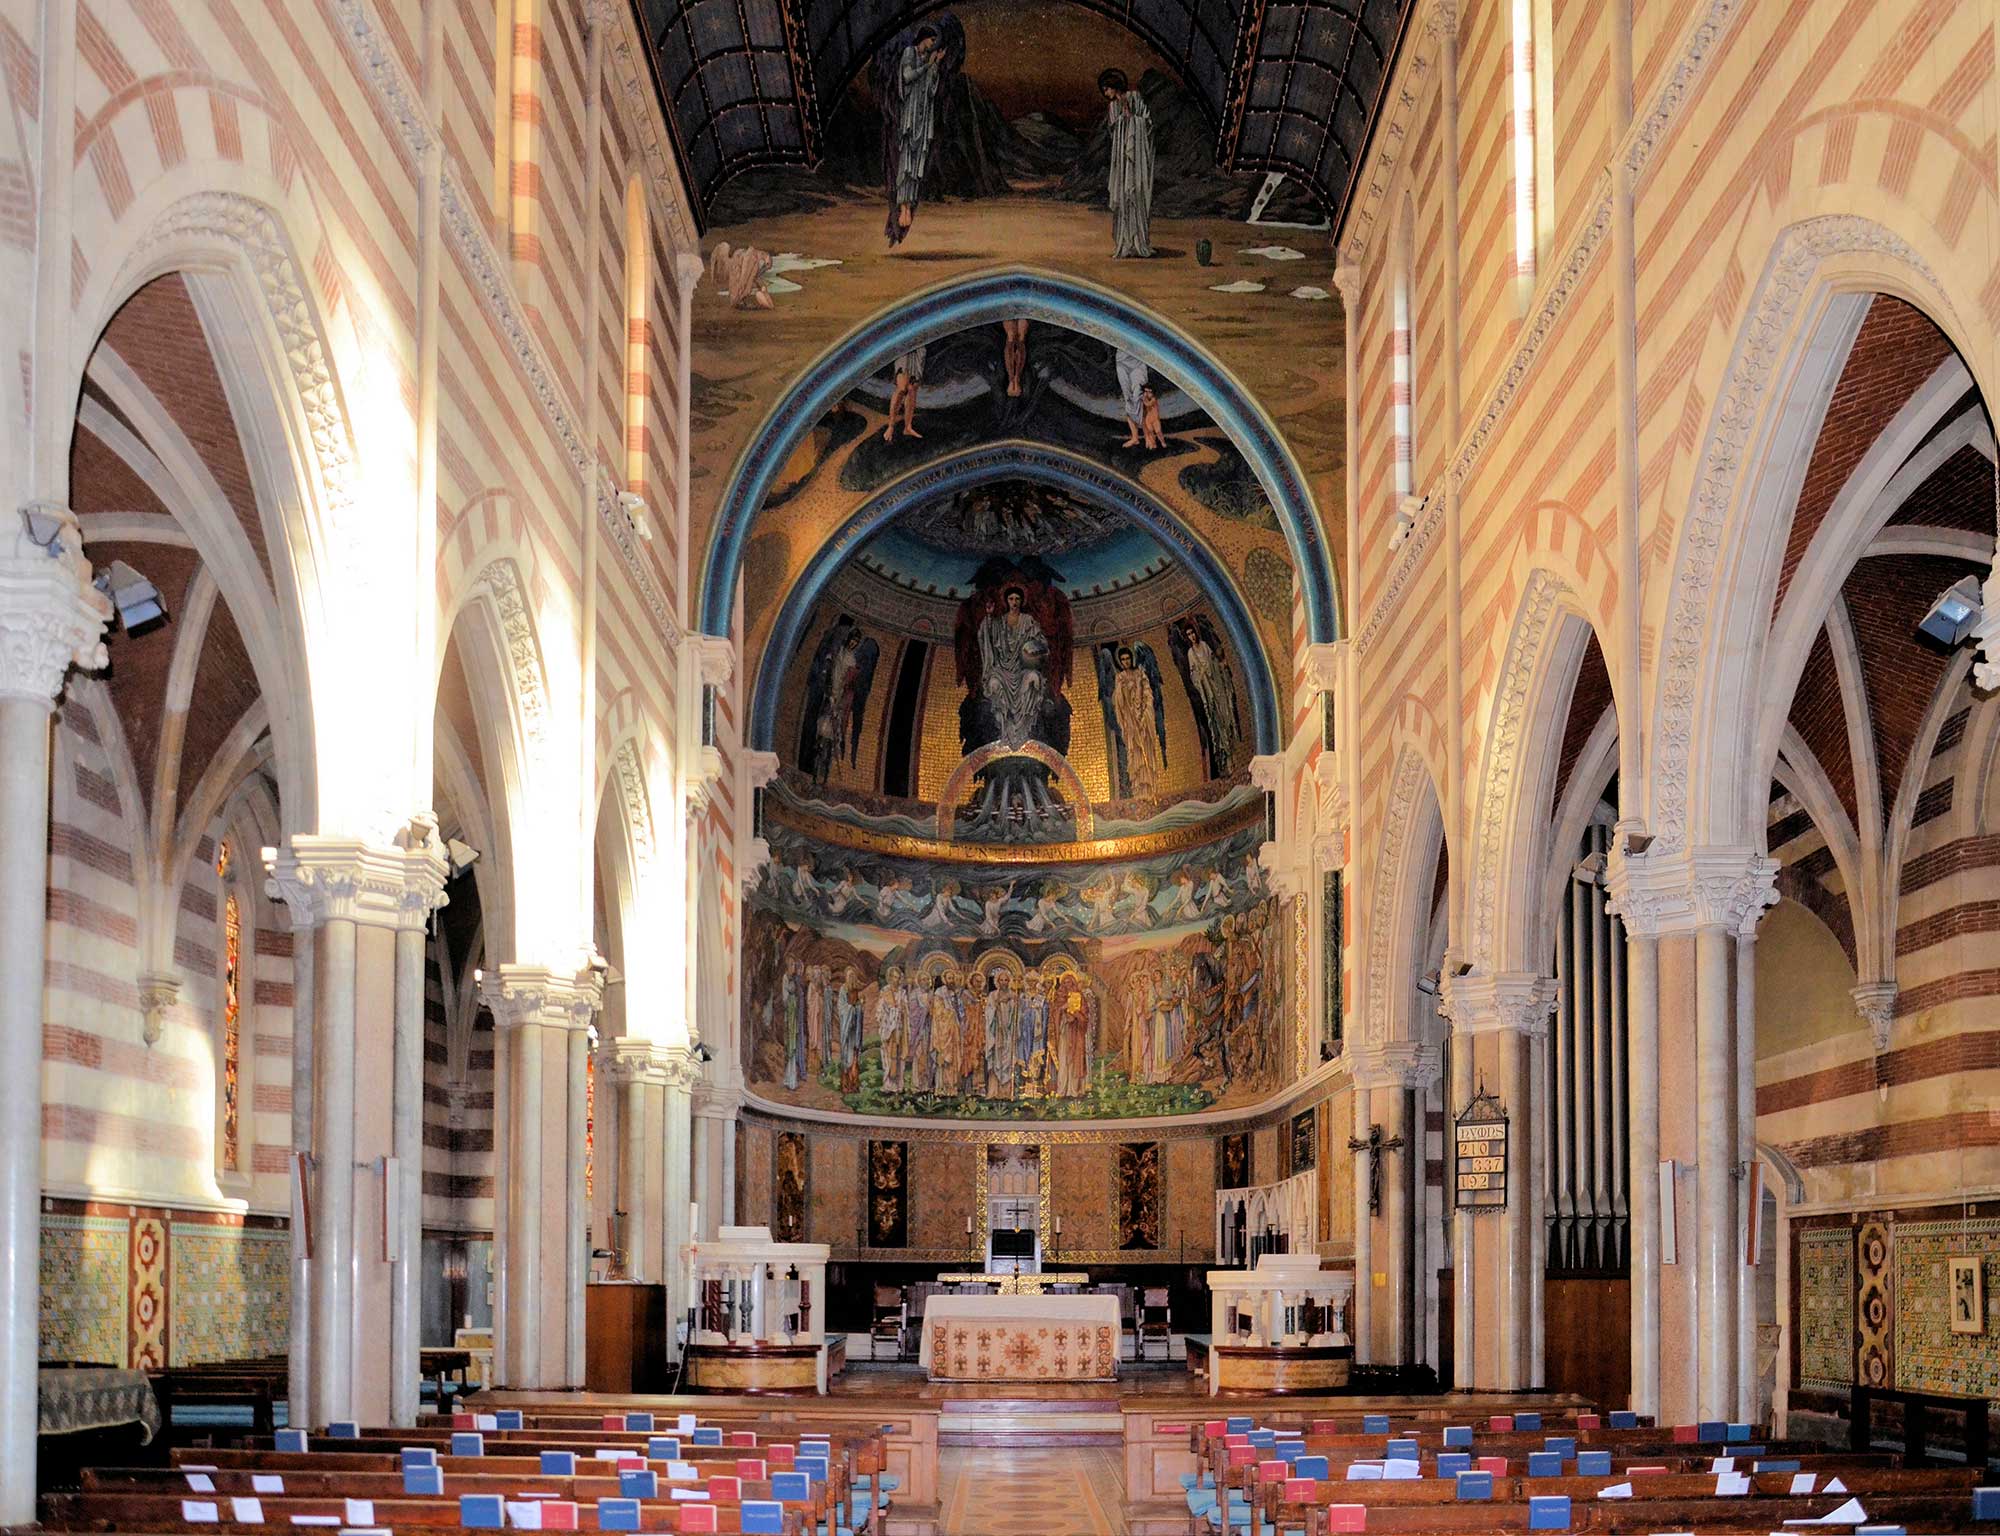 View towards the altar with elaborate paintings on the wall and ceiling. The walls are composed of alternating white stone and red brick stripes.